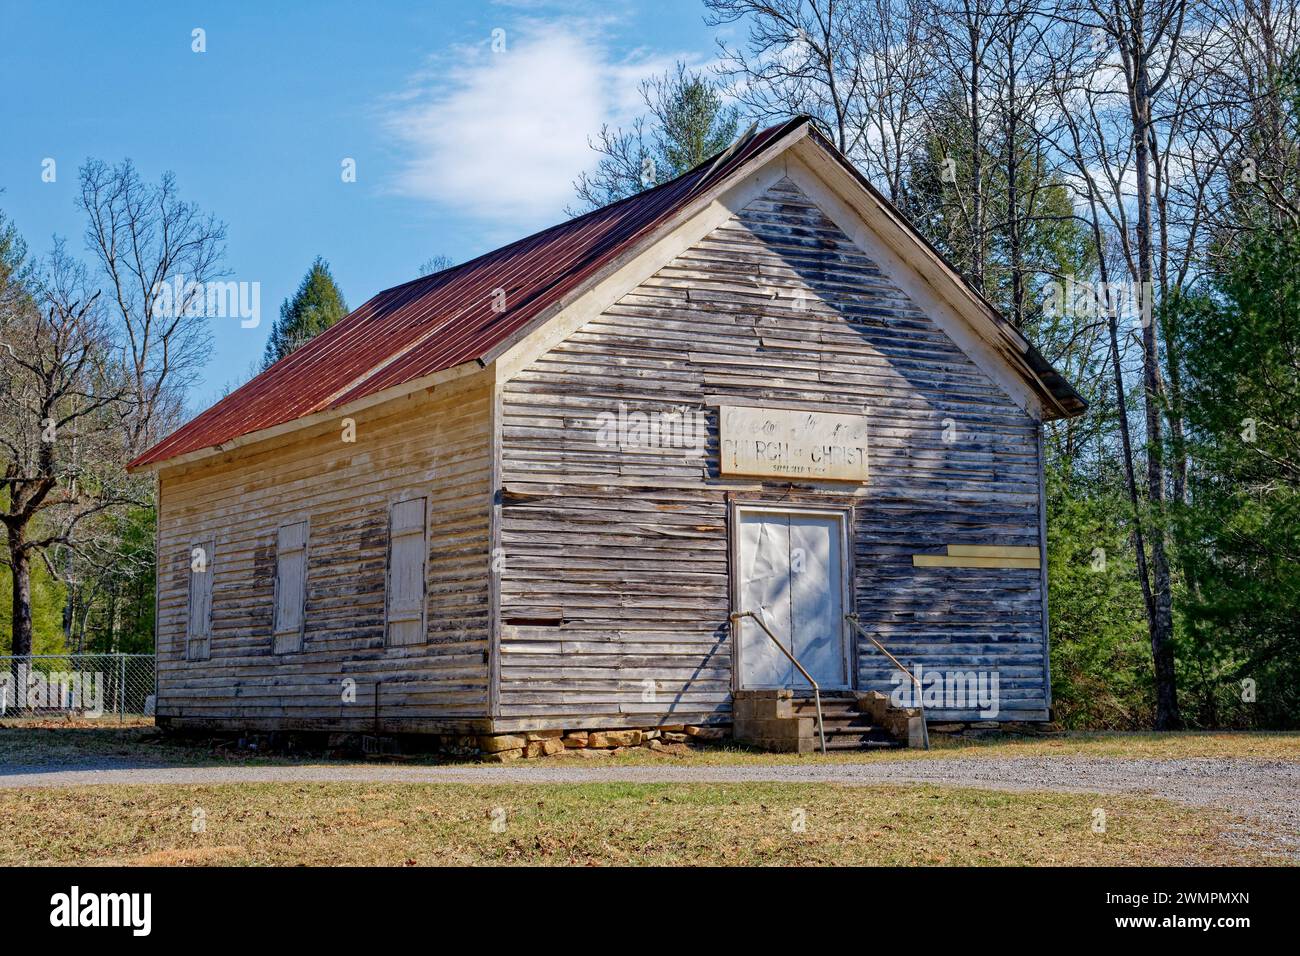 An old church in the mountains on a rural dirt road with a cemetery in the back a wooden building with a metal roof no longer used but being preserved Stock Photo